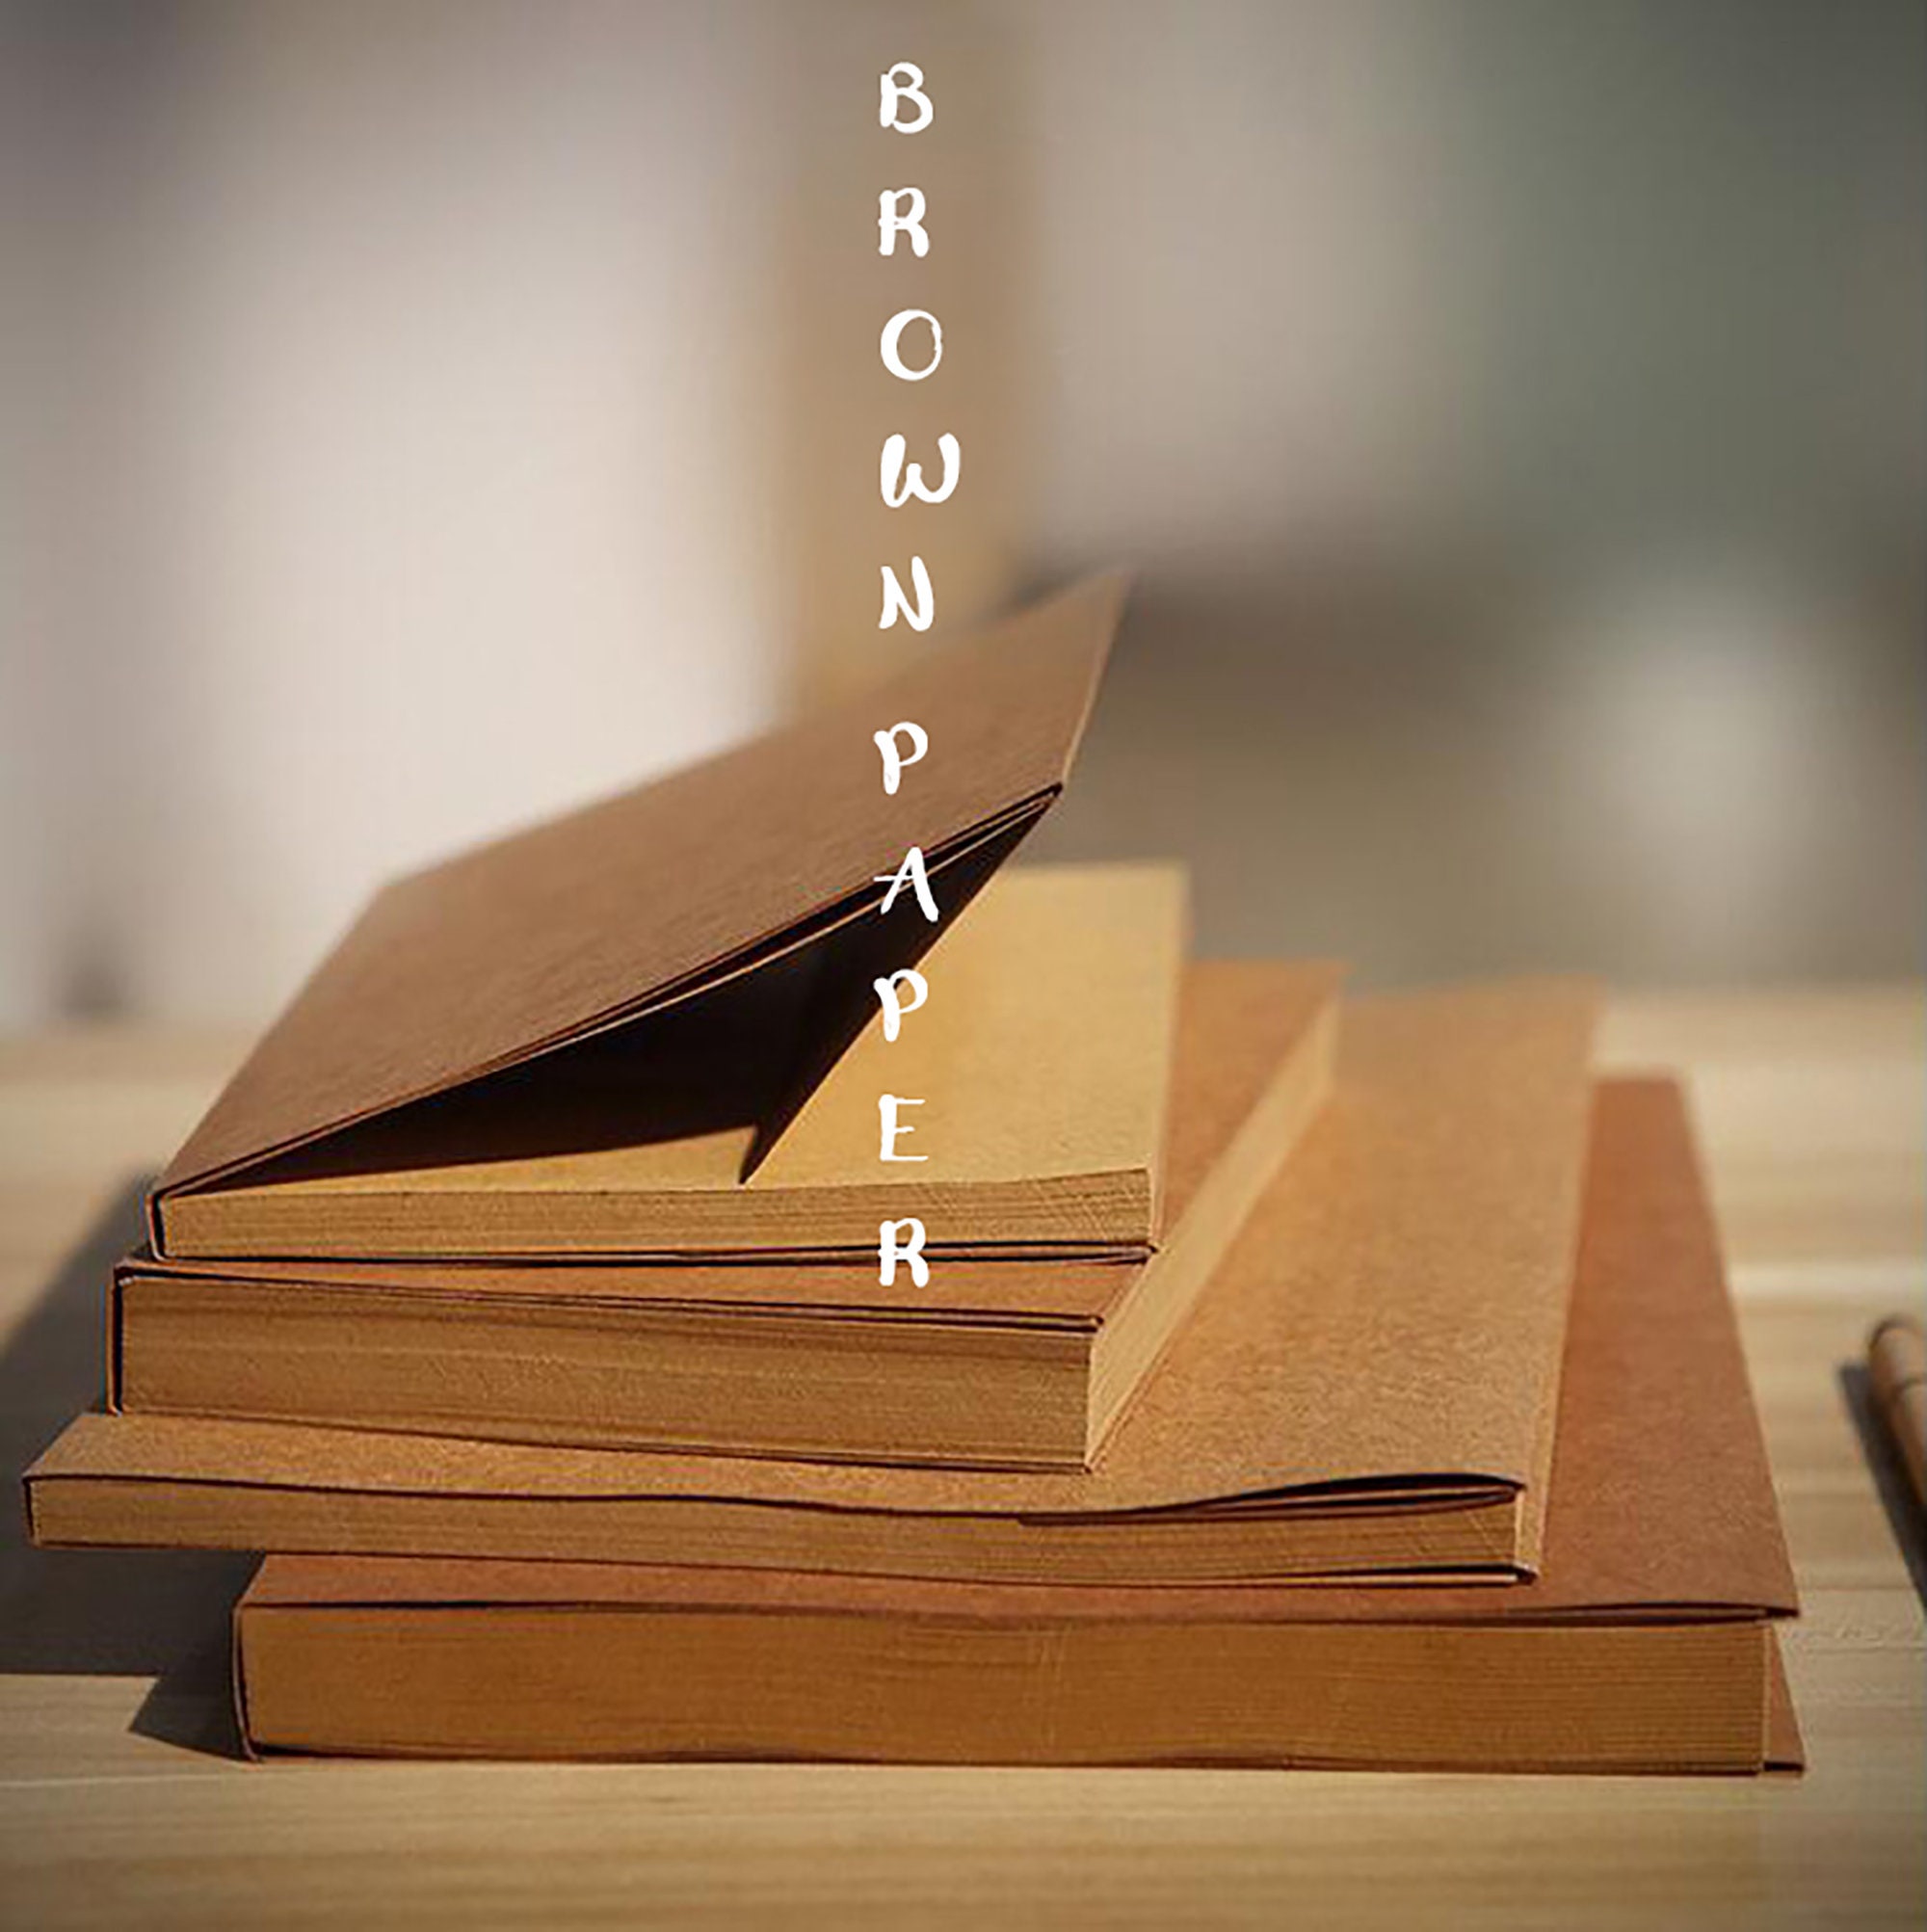 Small Toned Tan Paper Sketchbooks - 3 Pack